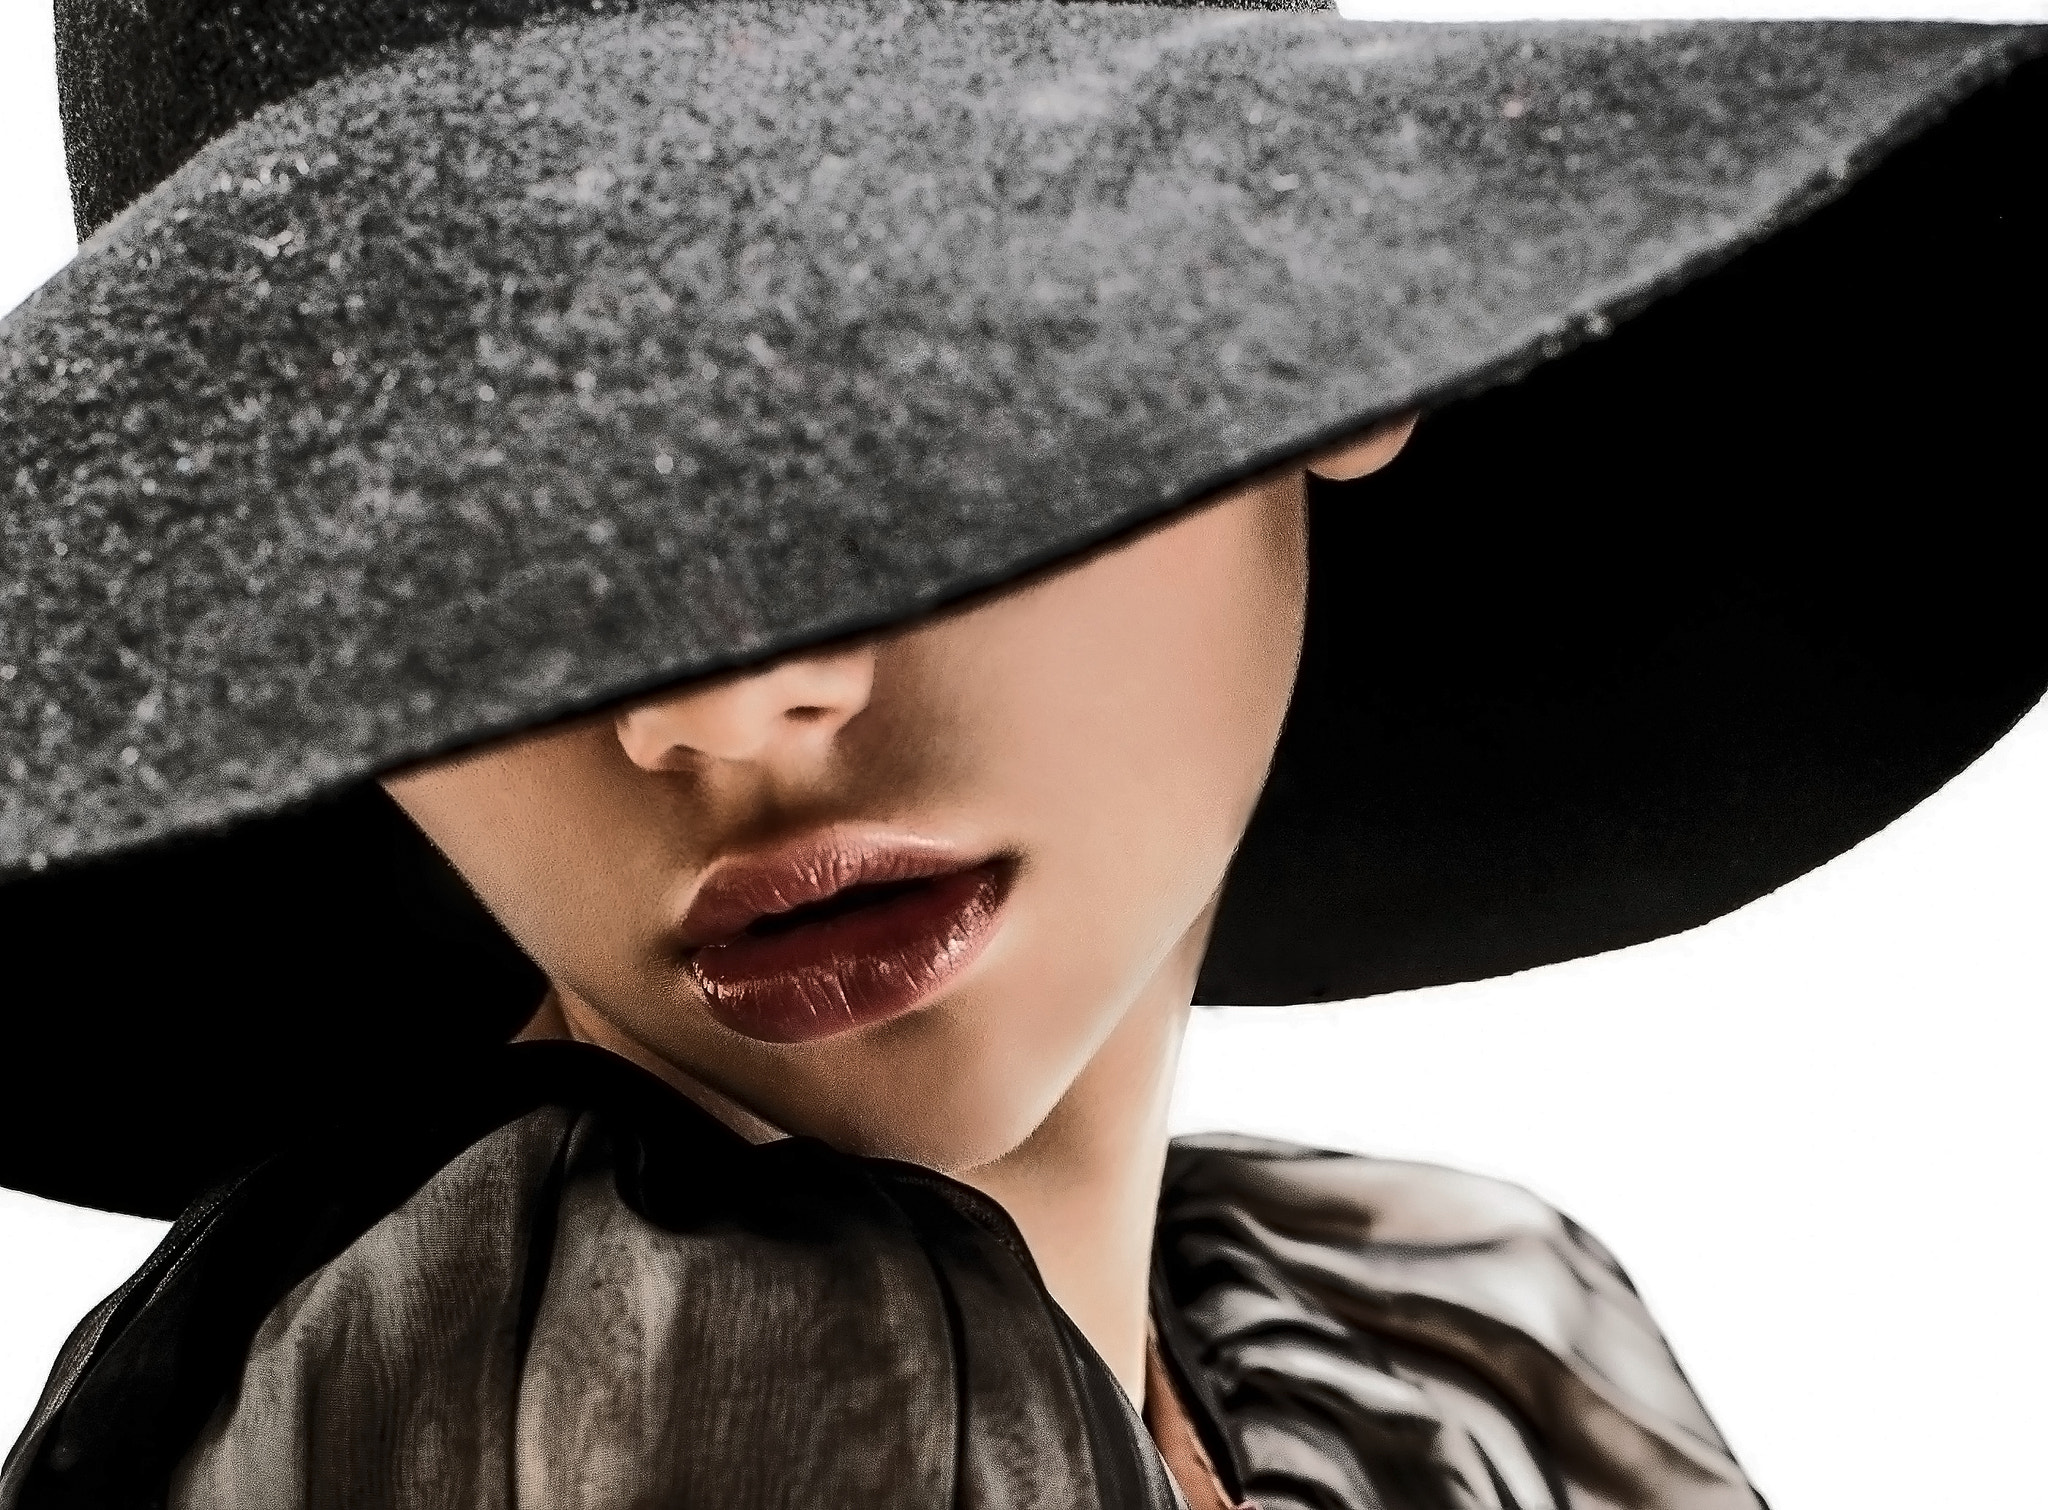 Nikon D3 sample photo. Girl in black hat touching face and lips photography